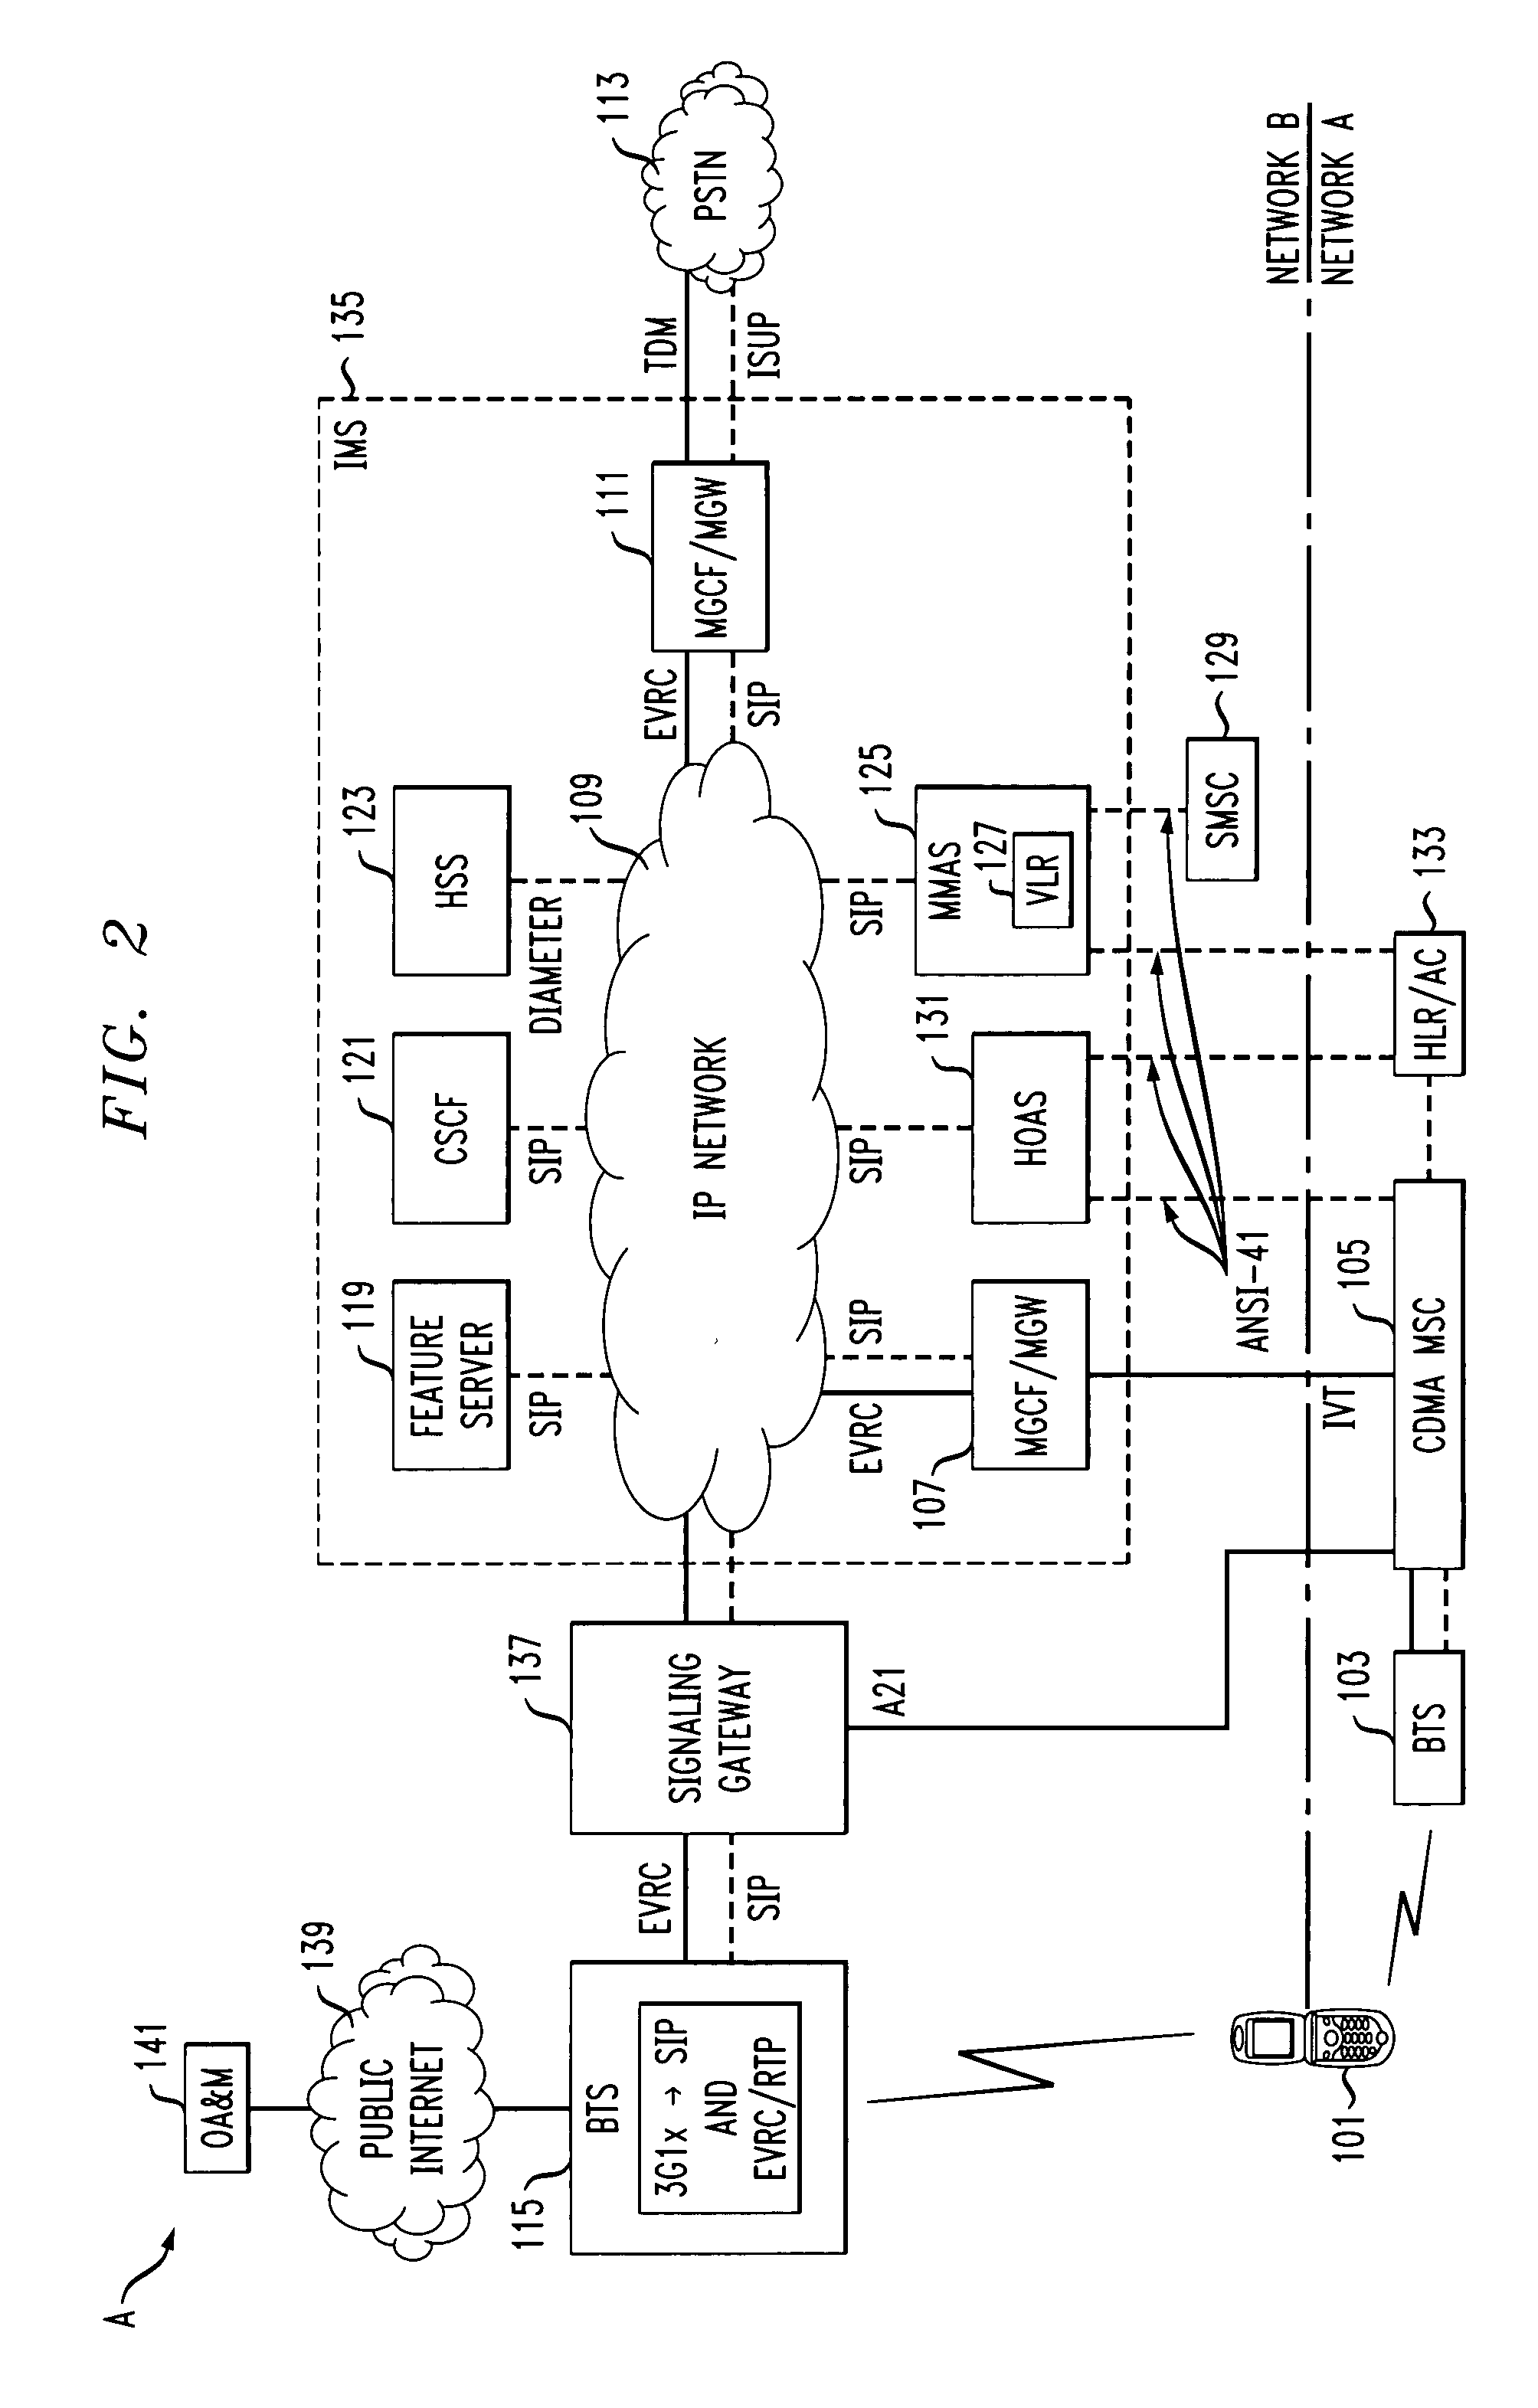 SESSION INITIATION PROTOCOL/INTERNET PROTOCOL MULTIMEDIA SUBSYSTEM BASED ARCHITECTURE FOR SUPPORTING 3G1x VOICE/DATA